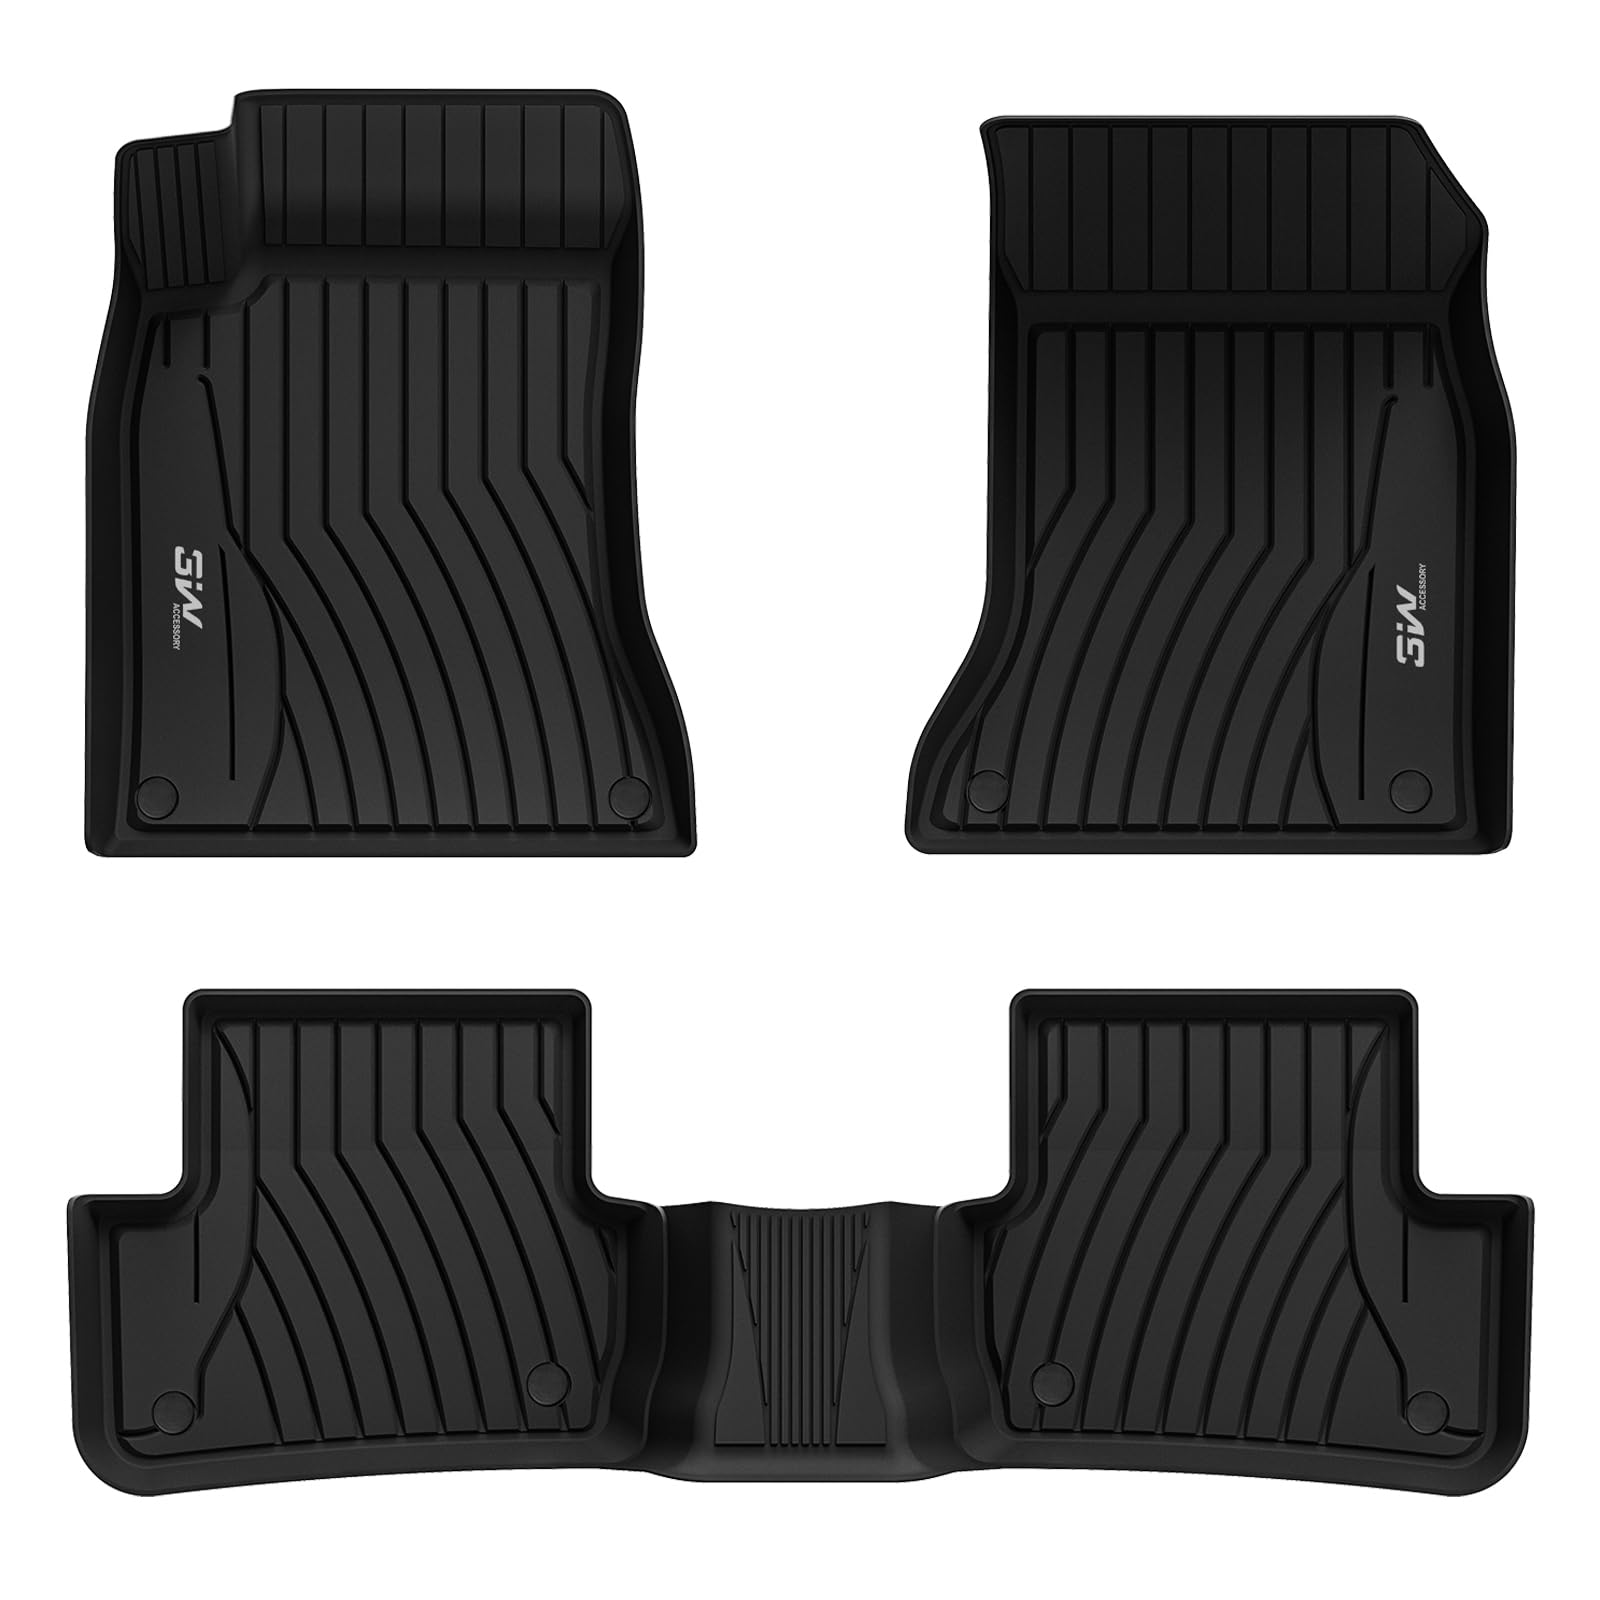 3W Mercedes-Benz GLA 2015-2020 Custom Floor Mats TPE Material & All-Weather Protection Vehicles & Parts 3Wliners 2015-2020 GLA 2015-2020 1st&2nd Row Mats